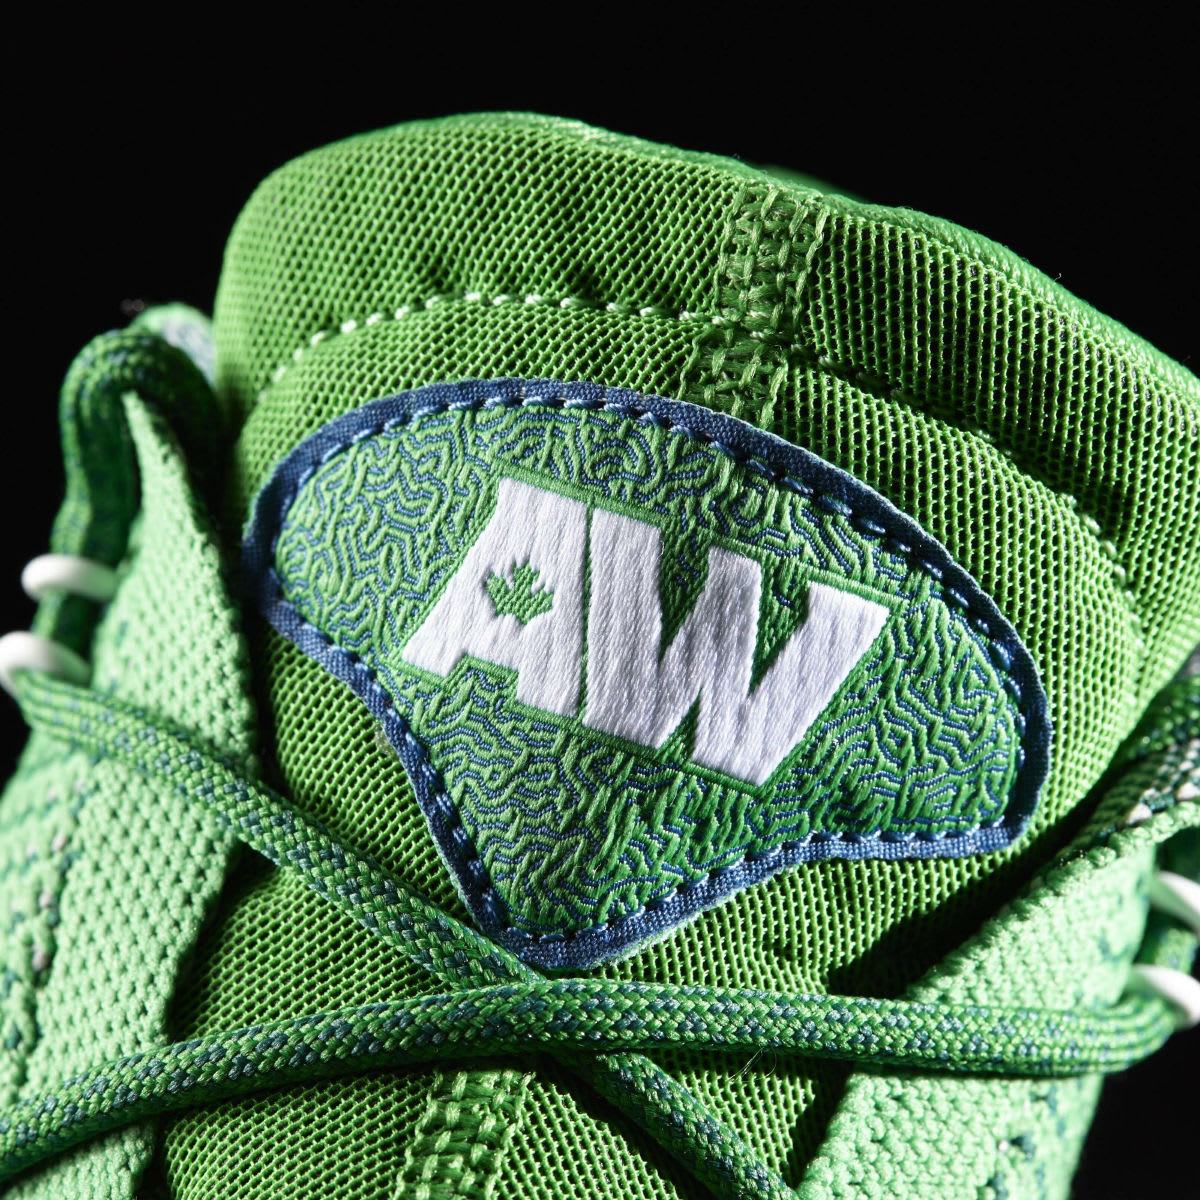 Adidas Crazy Explosive Andrew Wiggins Green Tongue BW0626